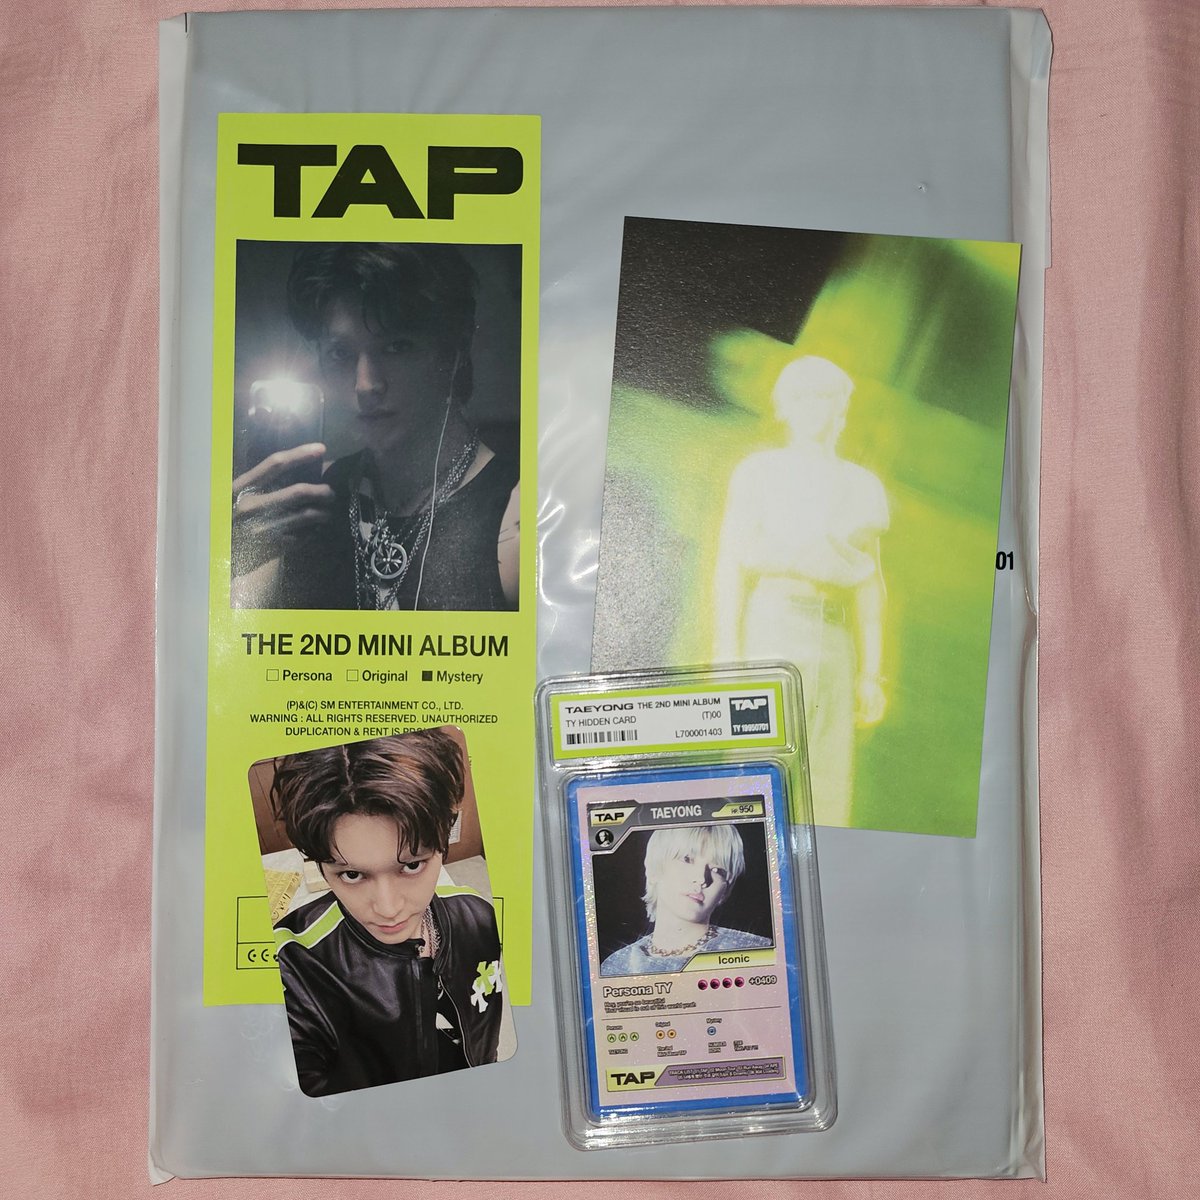 #Jhanny_happymail 💚

Saucy! Got my 1st batch of #TAEYONG_TAP albums 🩷😍

Thanks @CNAPhils 🤗🩷